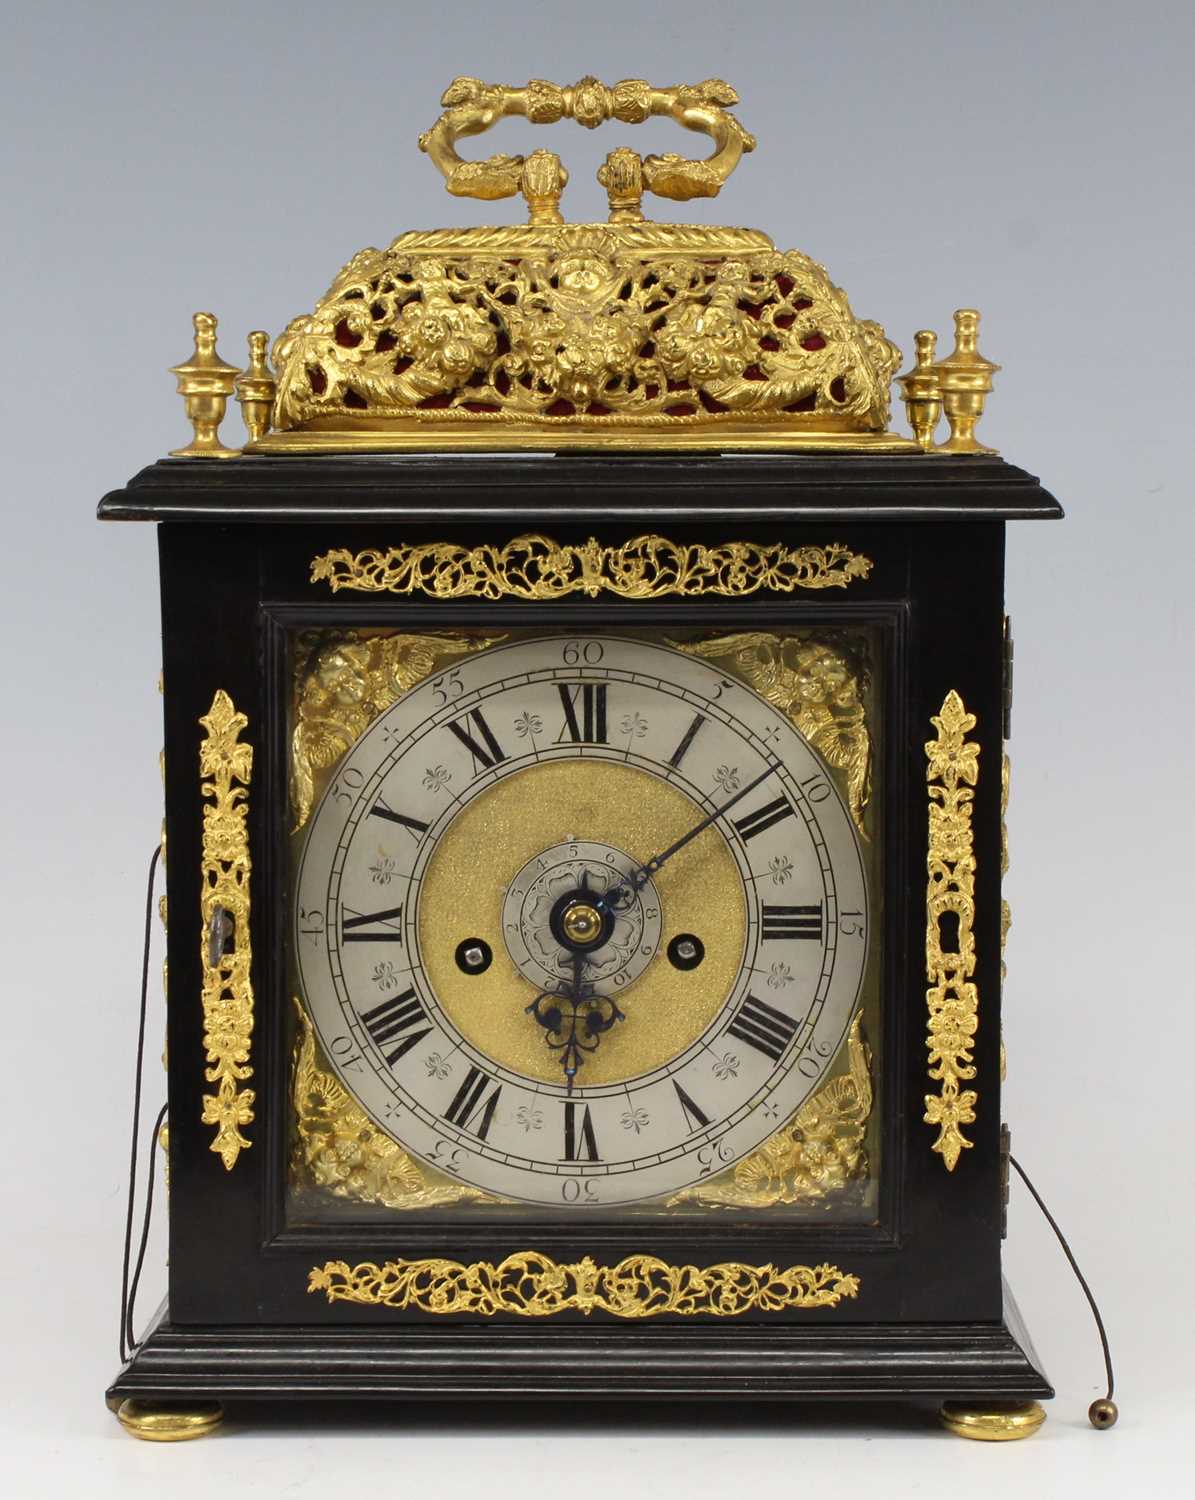 Nathanael Hodges of London - a late 17th century ebony veneered table clock, with pull quarter